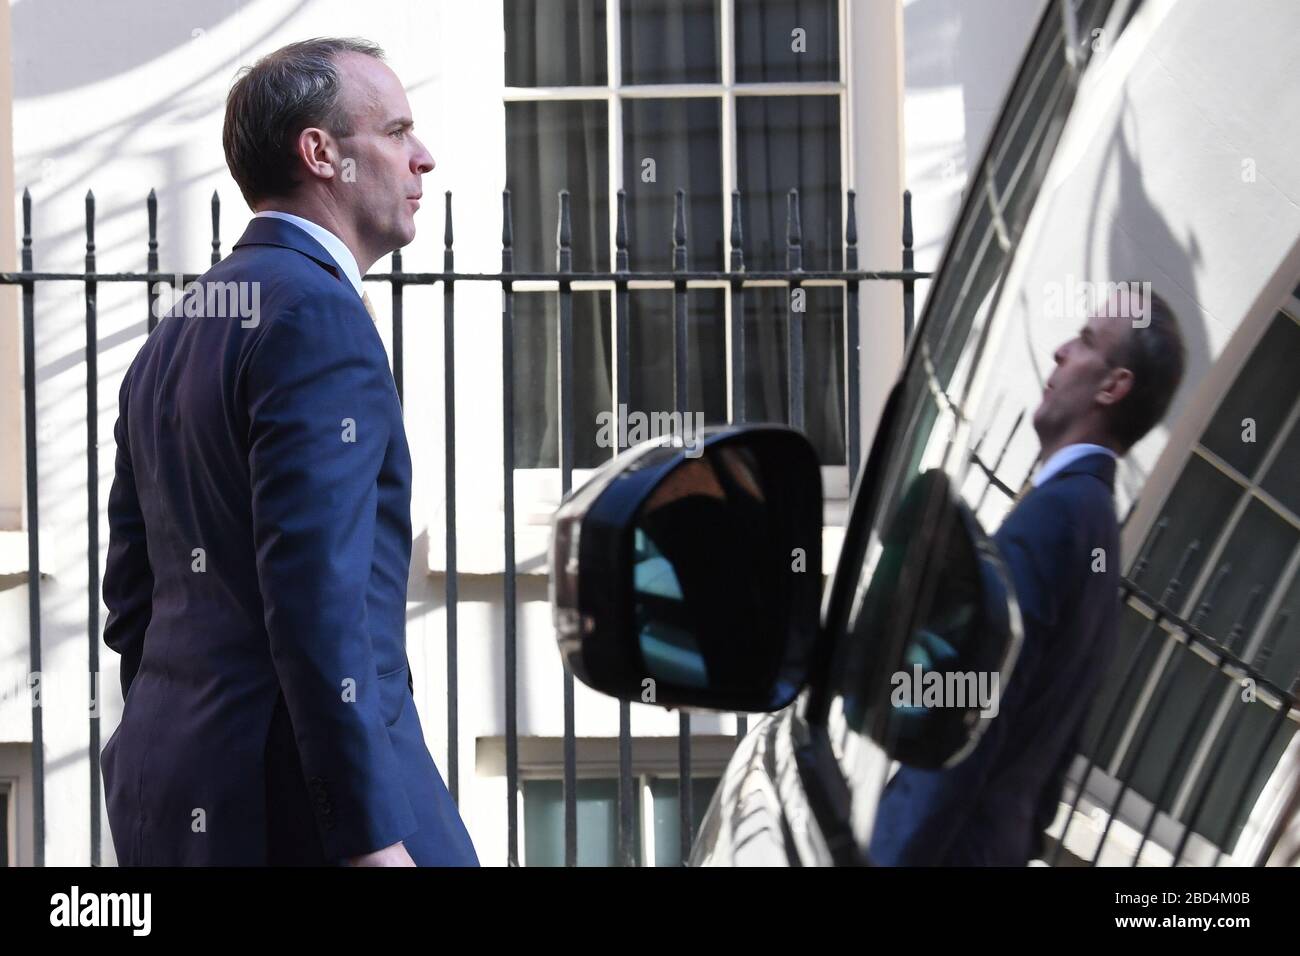 Foreign Secretary Dominic Raab, who is taking charge of the Government's response to the coronavirus crisis after Prime Minister Boris Johnson was admitted to intensive care Monday, arrives at 10 Downing Street, London. Stock Photo